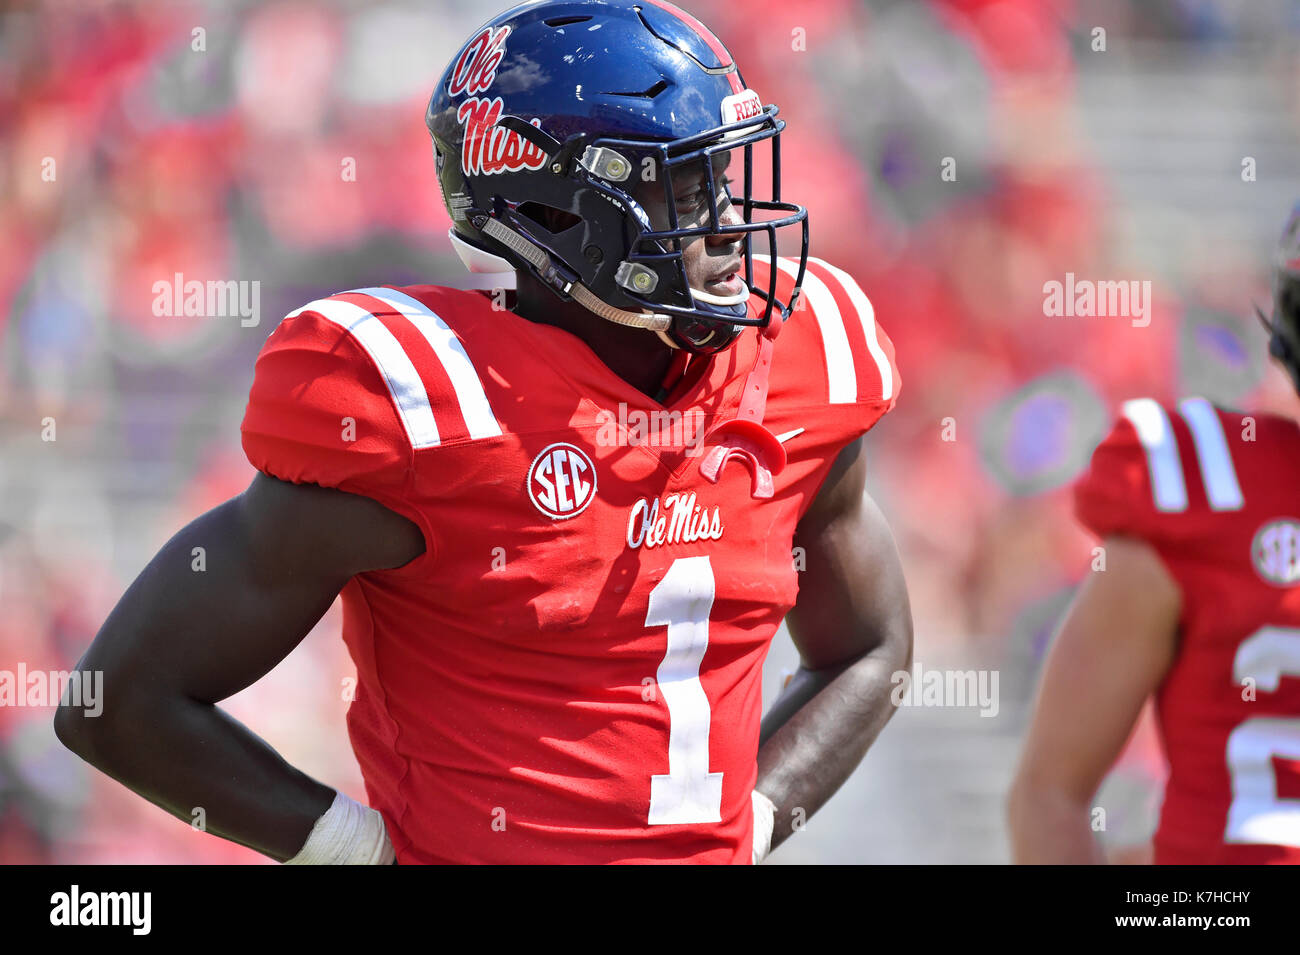 Oxford, MS, USA. 9th Sep, 2017. Mississippi receiver A.J. Brown during the fourth quarter of a NCAA college football game against Tennessee-Martin at Vaught-Hemmingway Stadium in Oxford, MS. Mississippi won 45-23. Austin McAfee/CSM/Alamy Live News Stock Photo